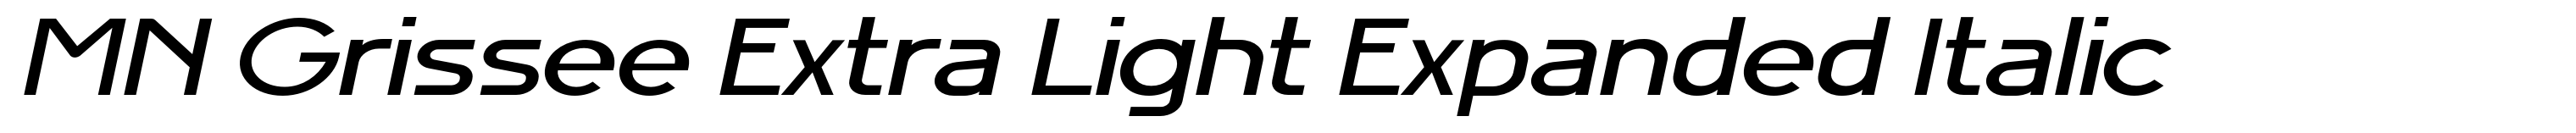 MN Grissee Extra Light Expanded Italic